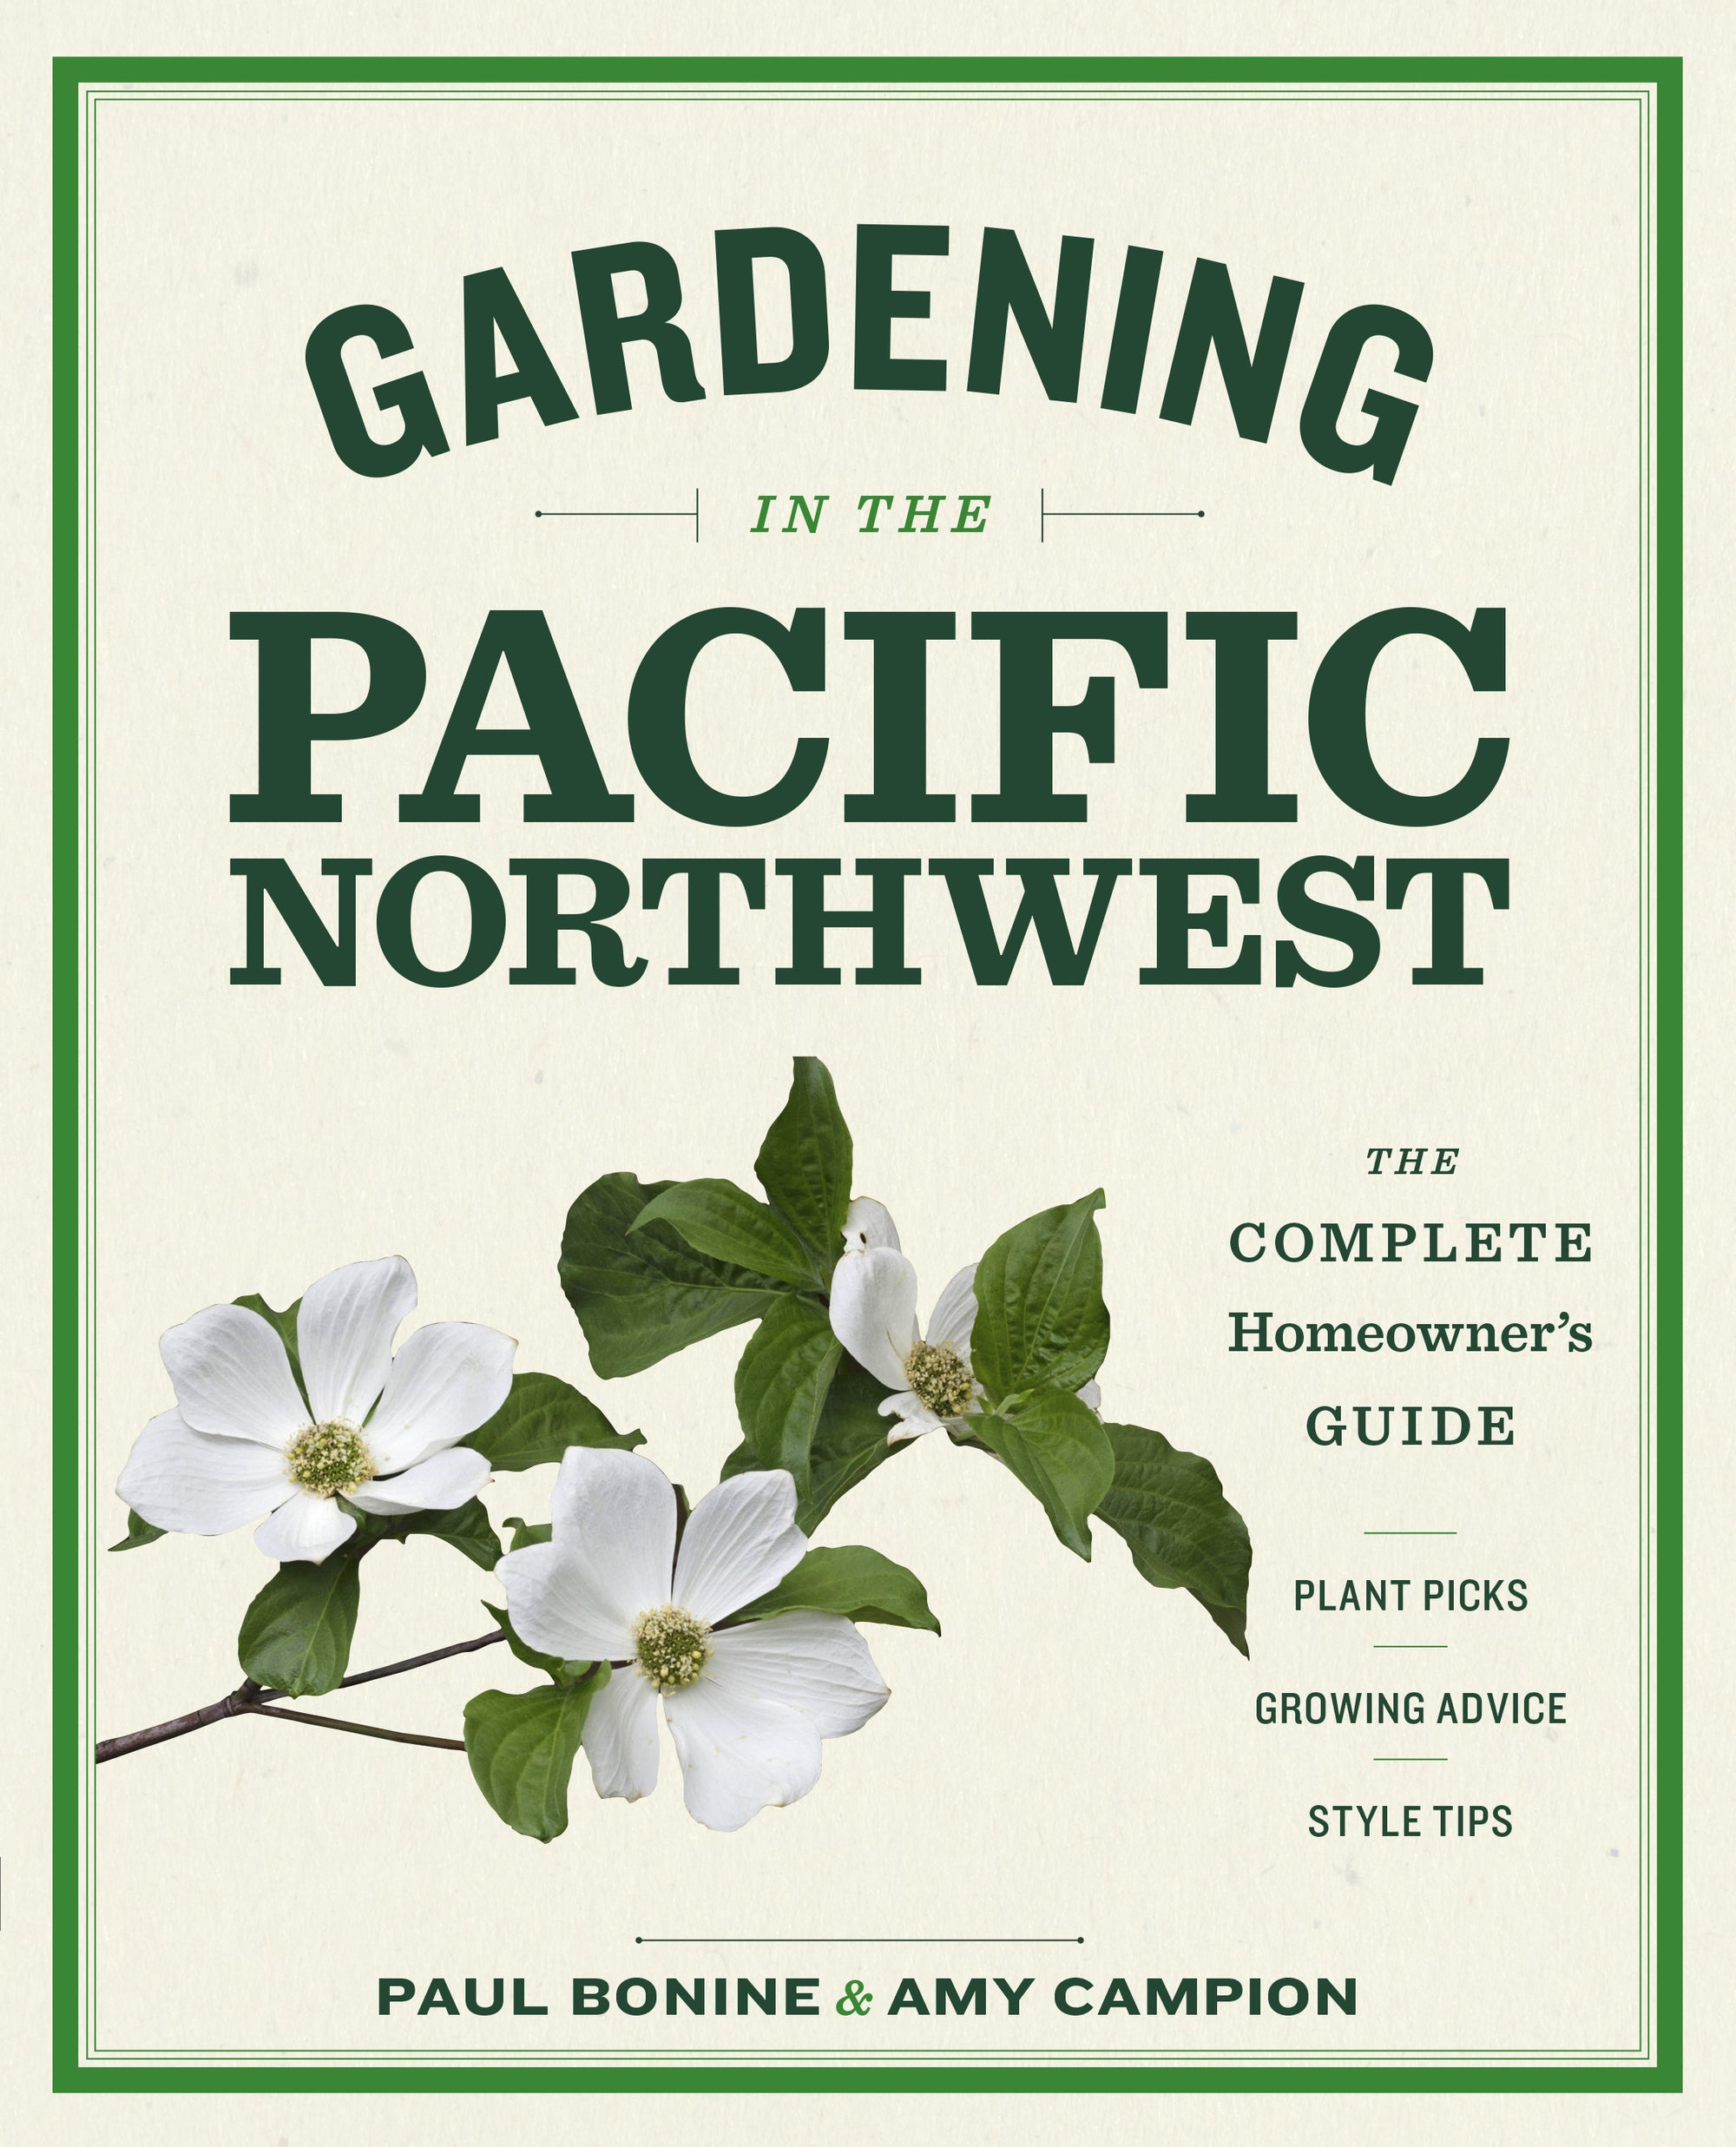 A cream cover with a green border. A dogwood branch with white flowers and green leaves is also on the cover.